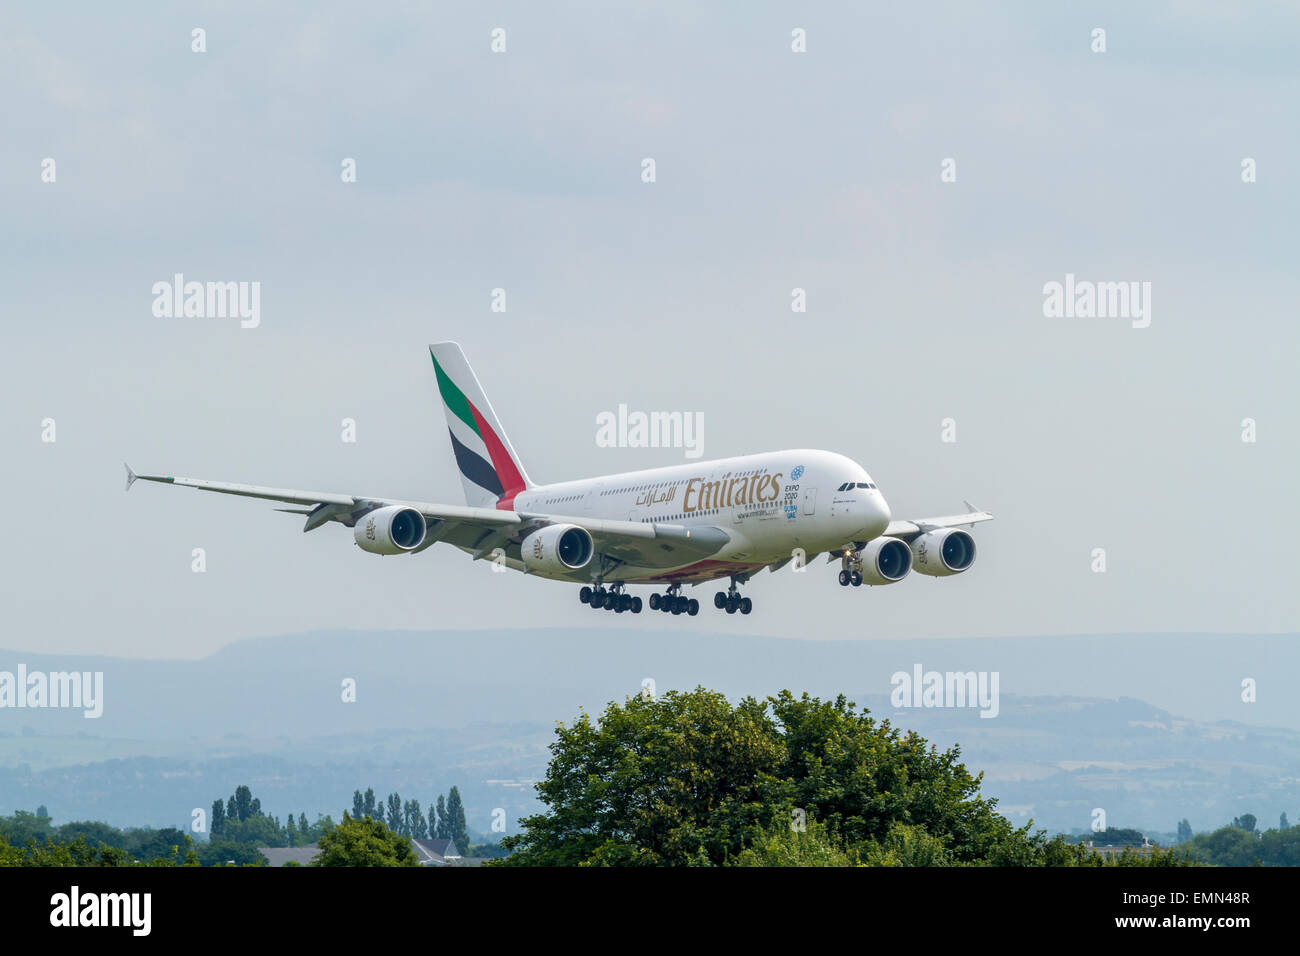 Emirates Airbus A380-800 plane, A6-EEK, on its approach for landing at Manchester Airport, England, UK Stock Photo